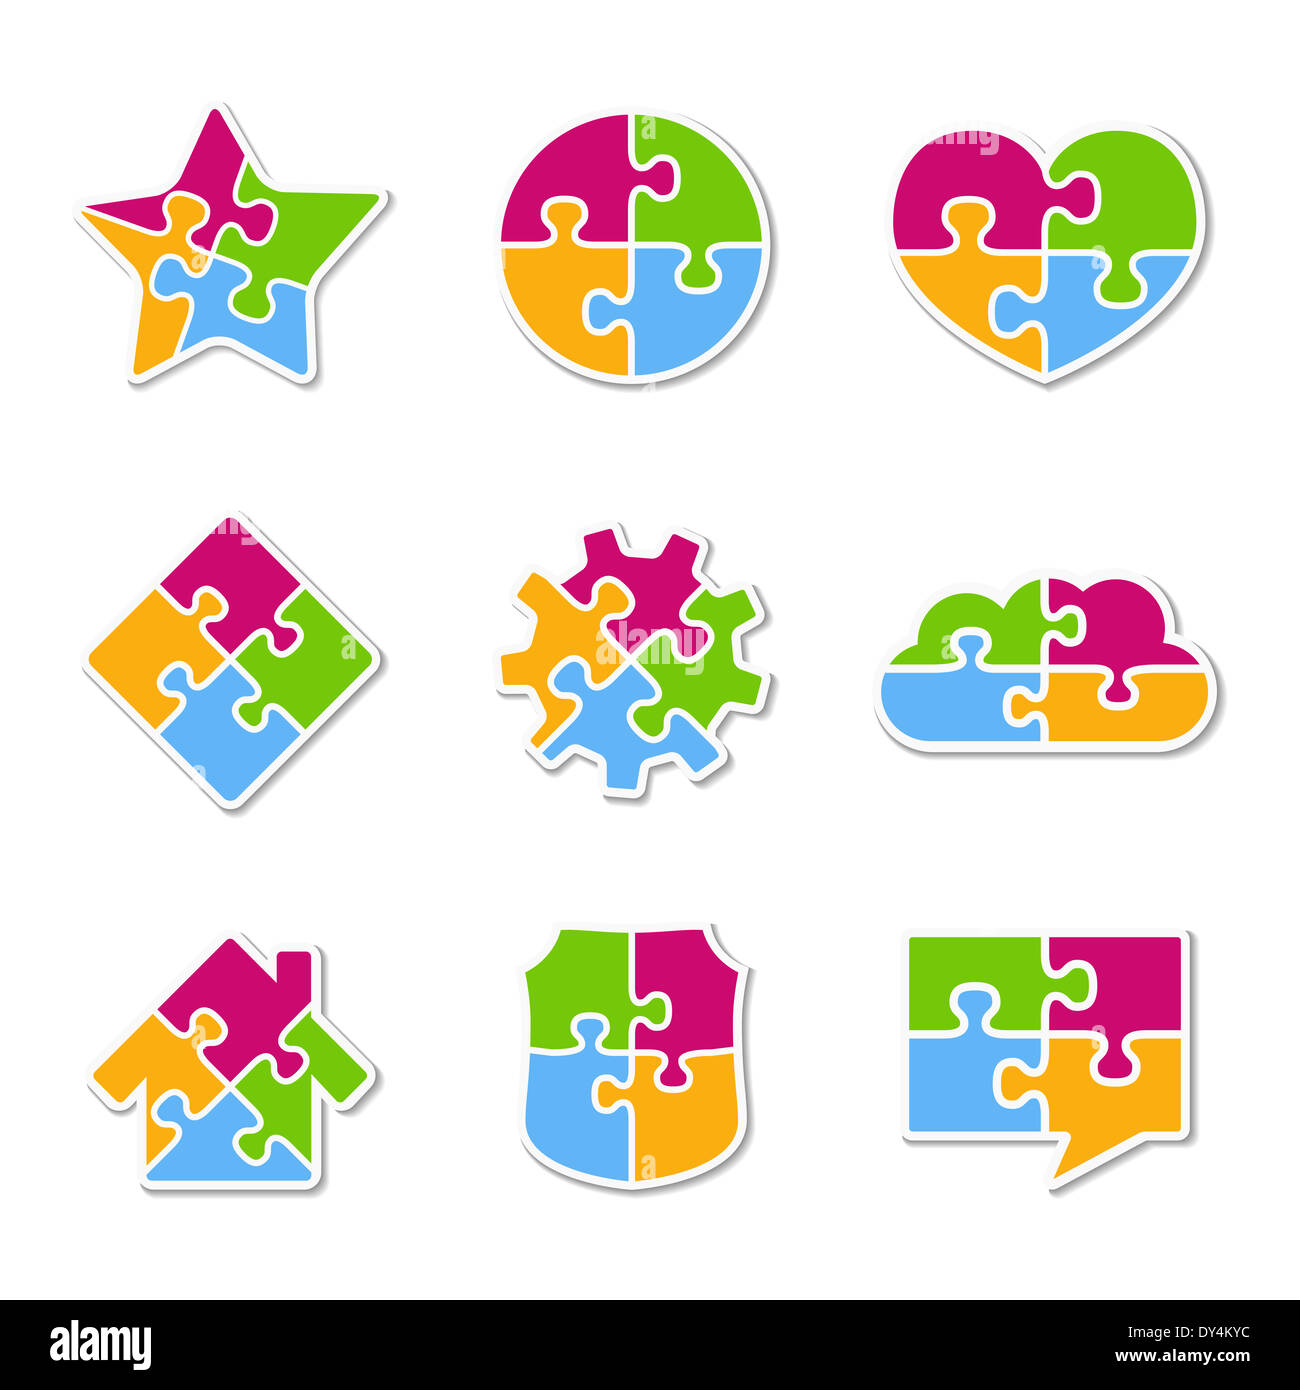 Icons made of puzzle pieces, design elements for your logo Stock Photo -  Alamy